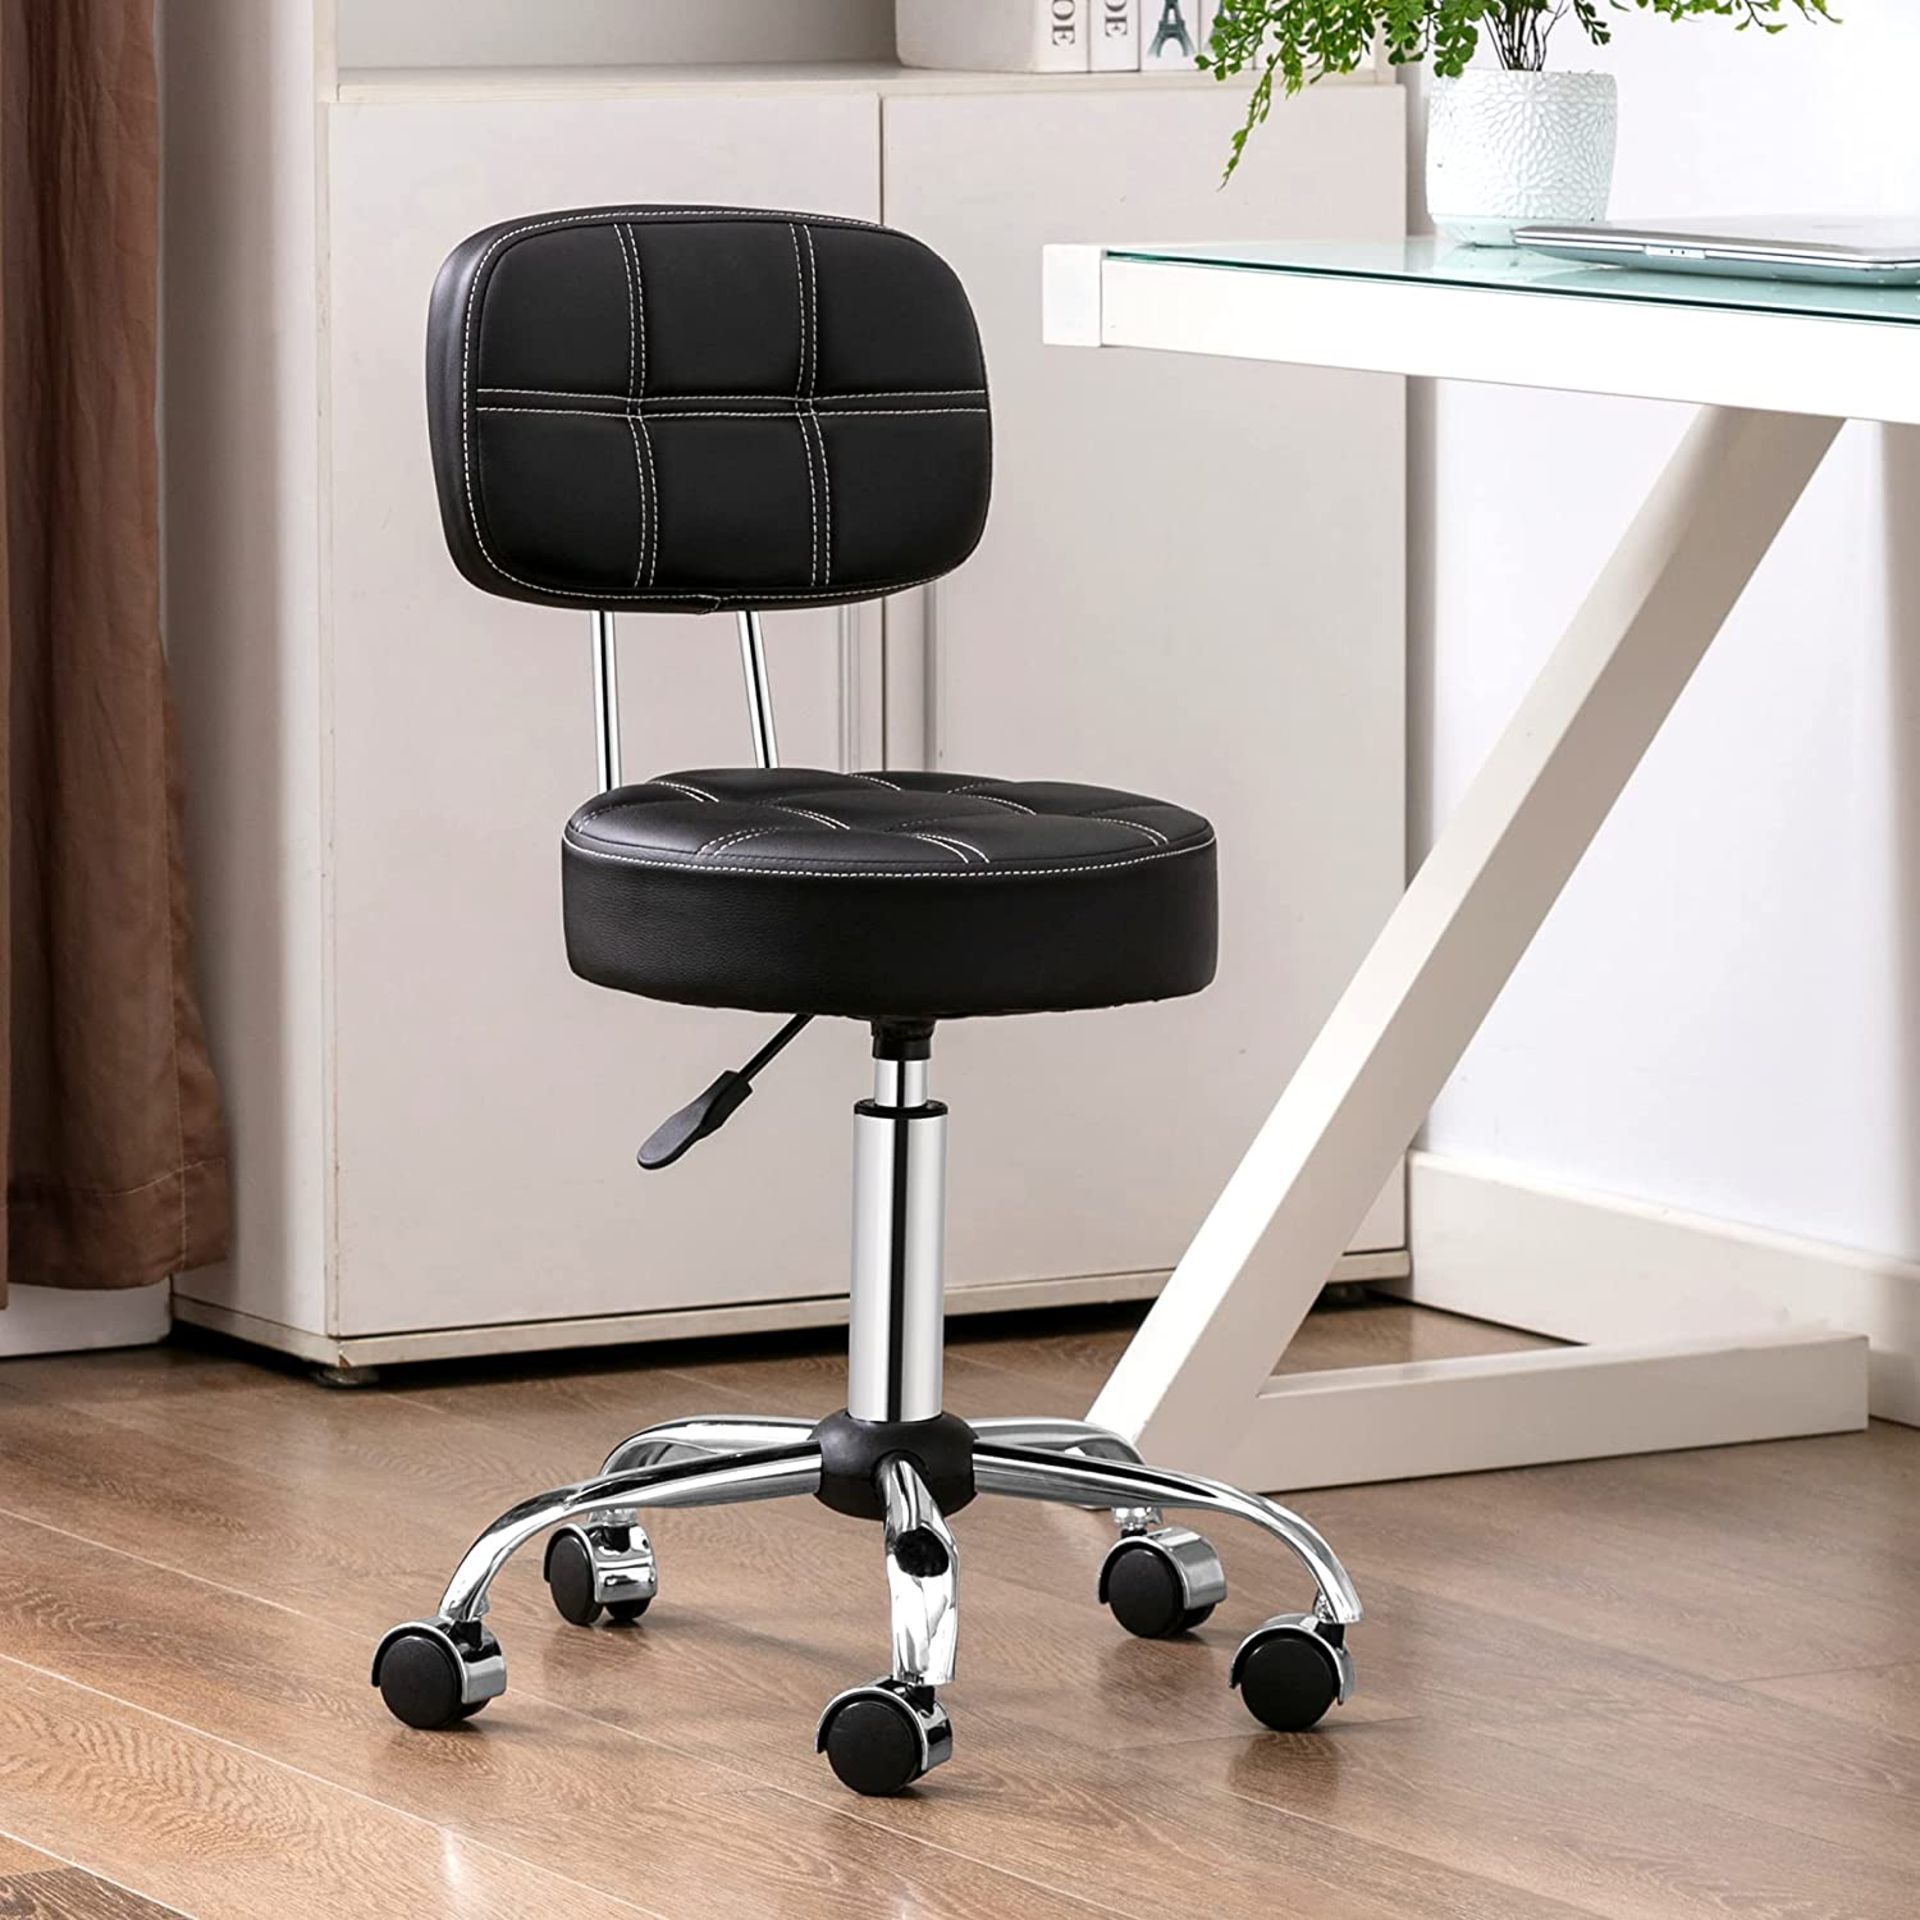 NEW Rolling stool with High Backrest, Leather Massage Stool Ergonomic Drafting Chair for Home Swivel - Image 4 of 5